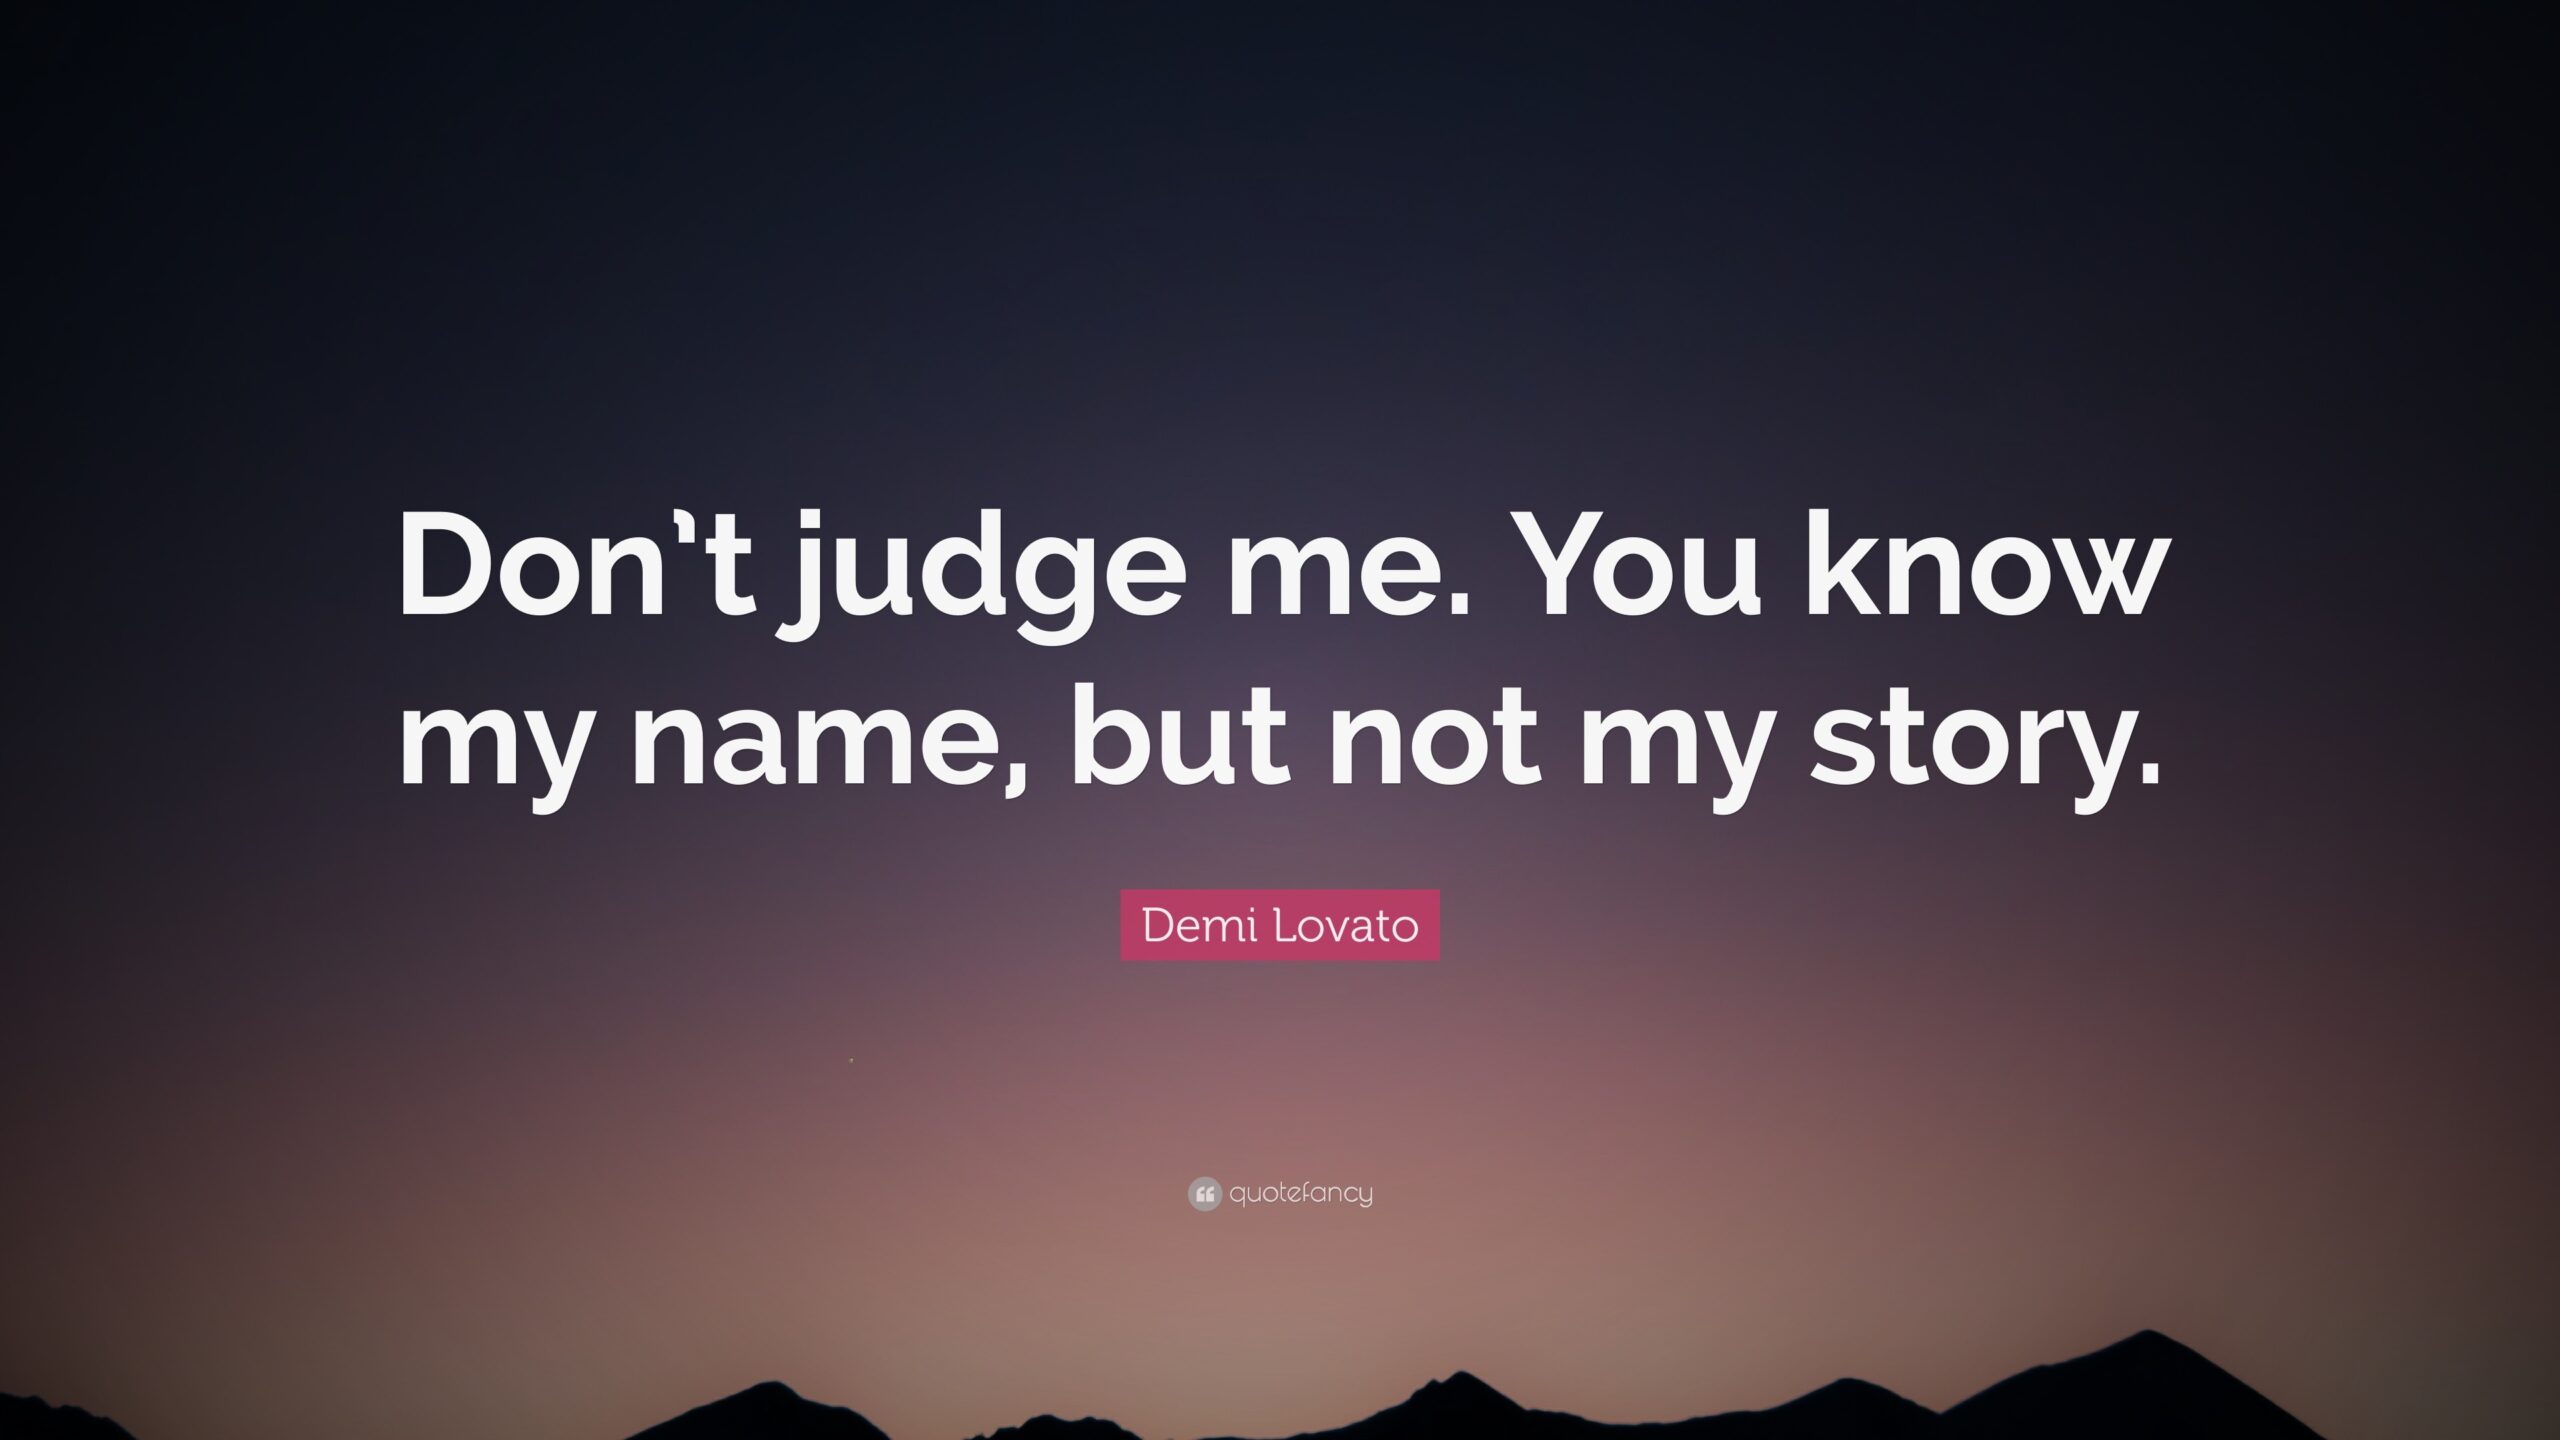 Don’t Judge Me. You Know My Name, But Not My Story